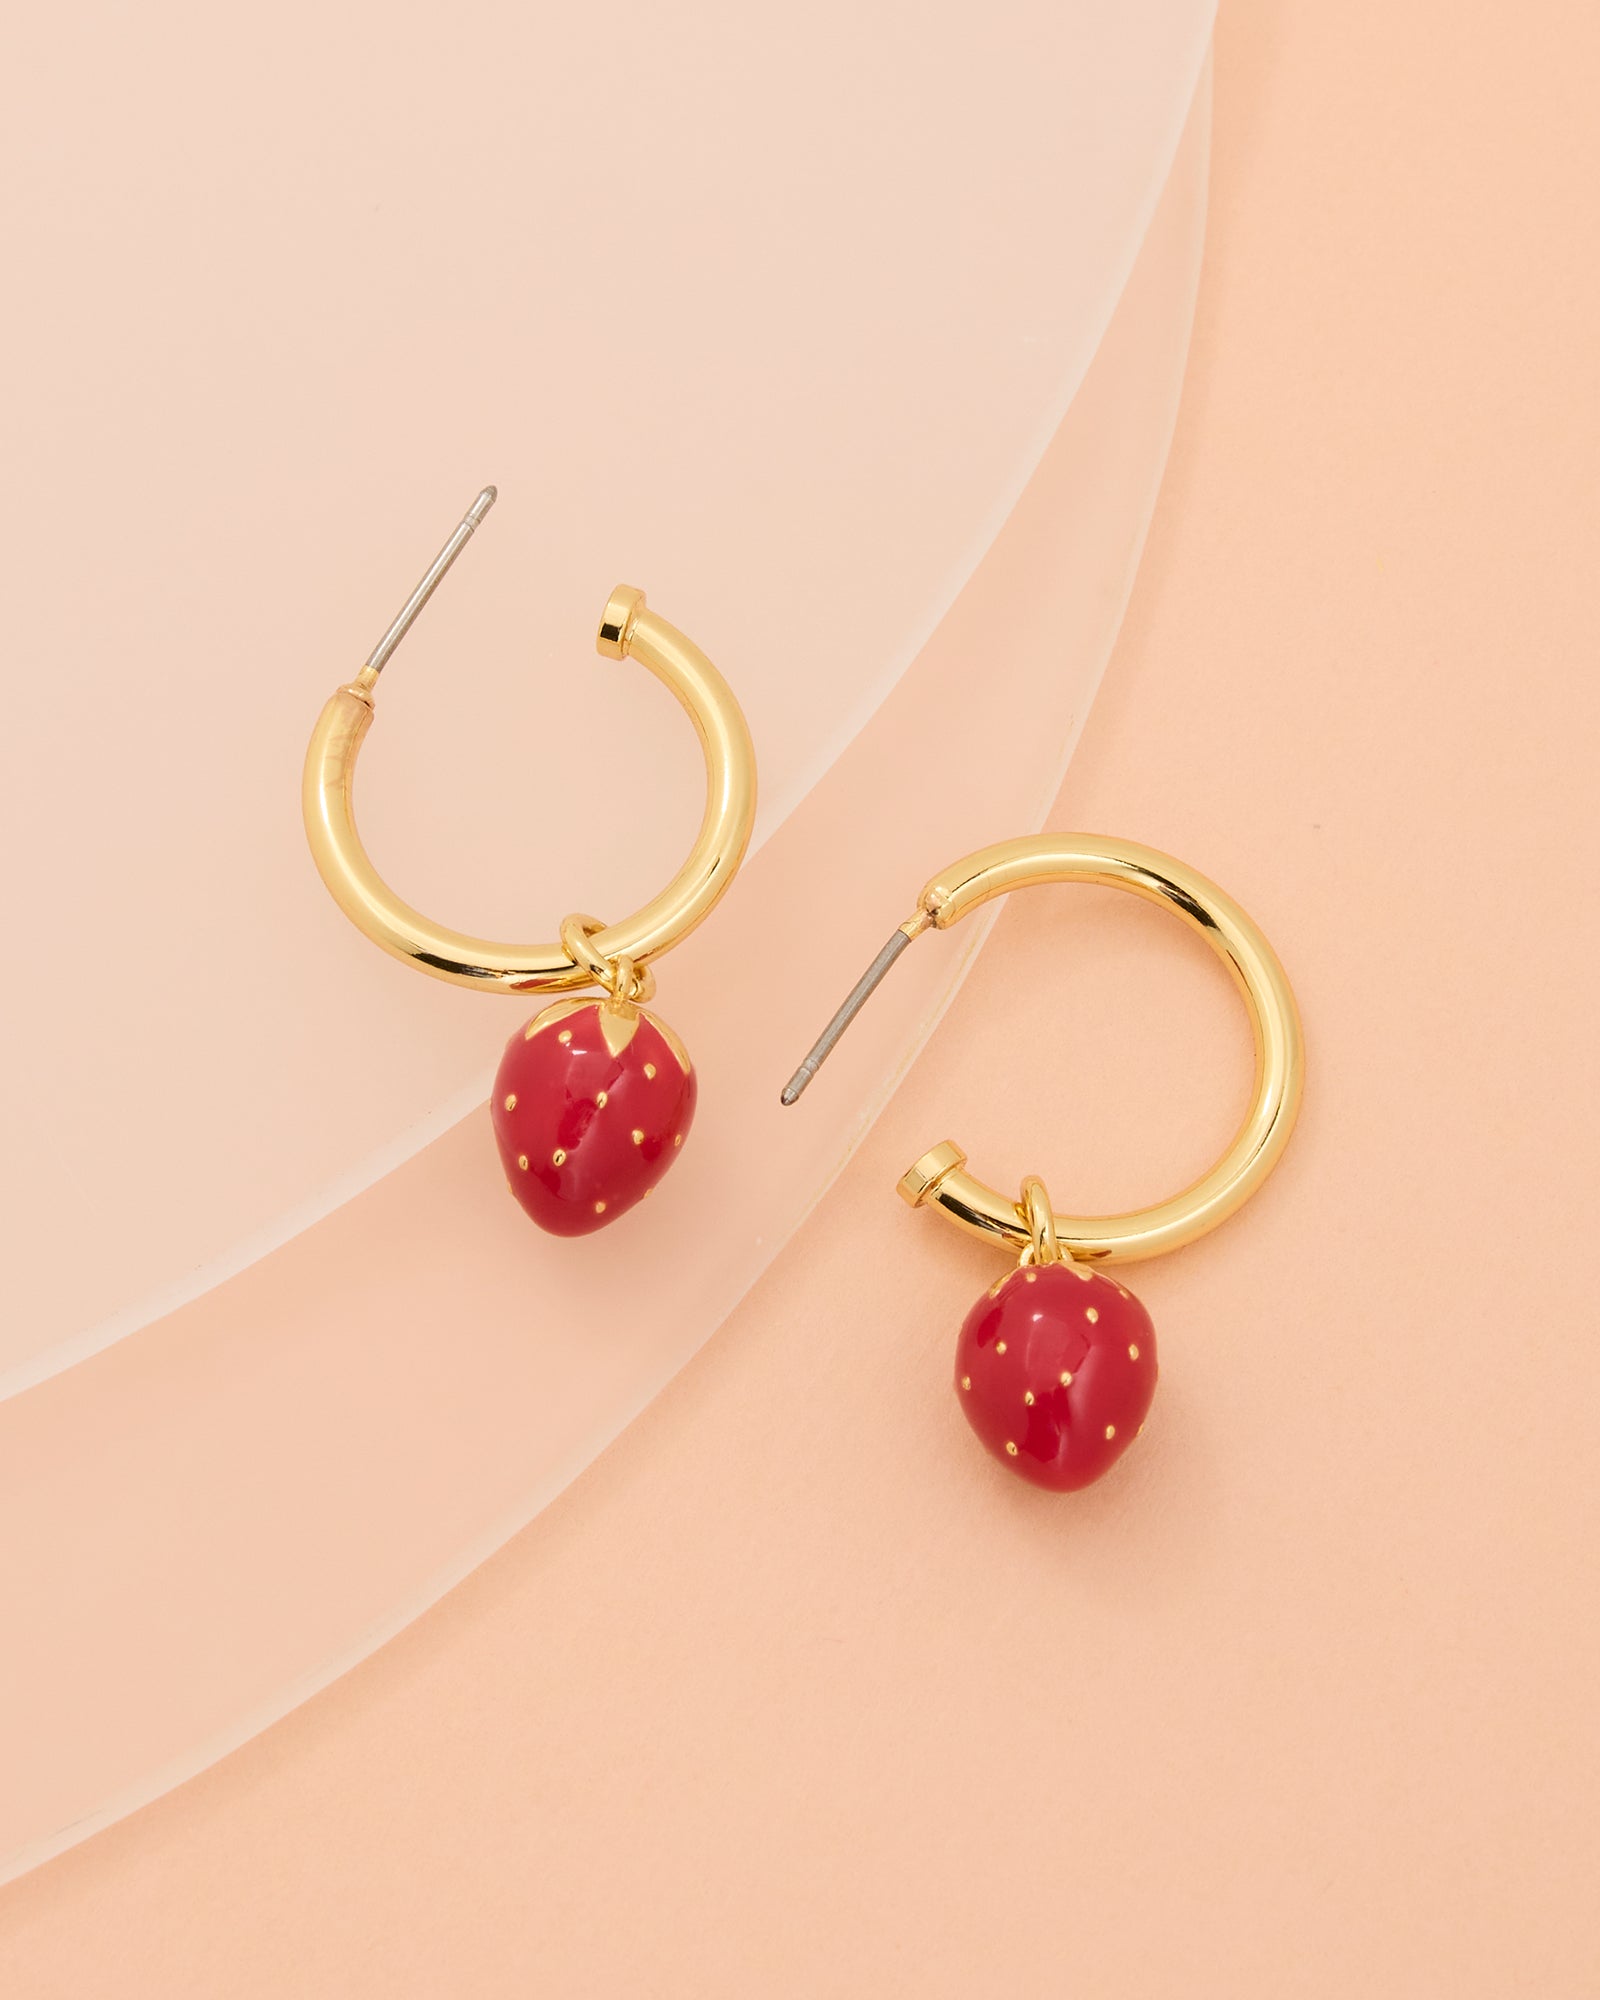 Gold hoop earrings with strawberry charm